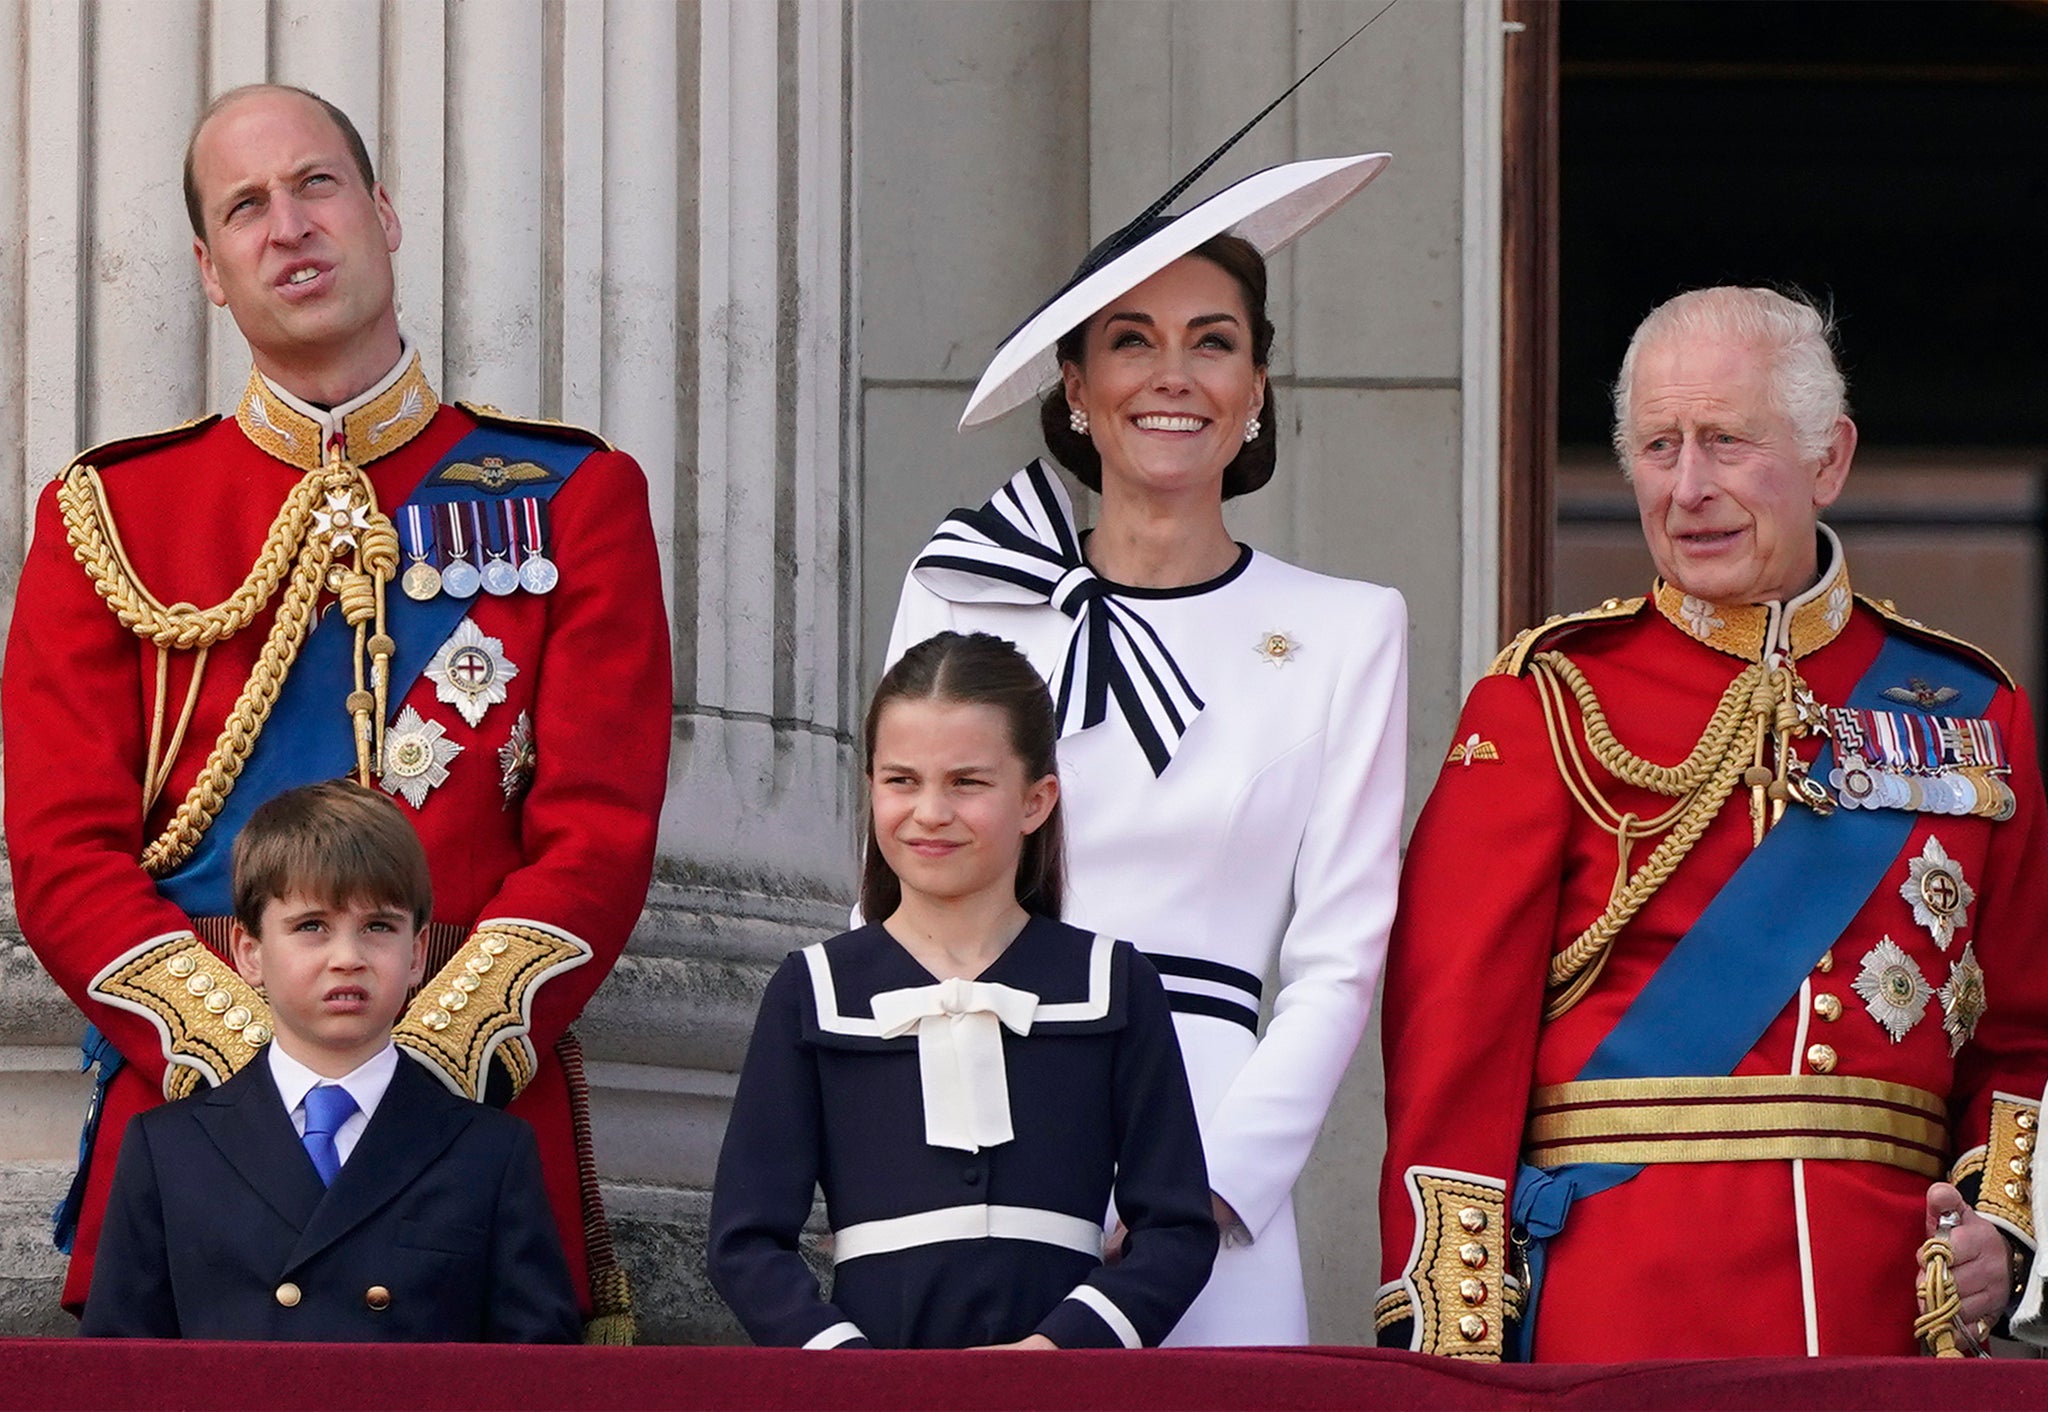 Prince William with his wife and father during yesterday's Trooping the Color